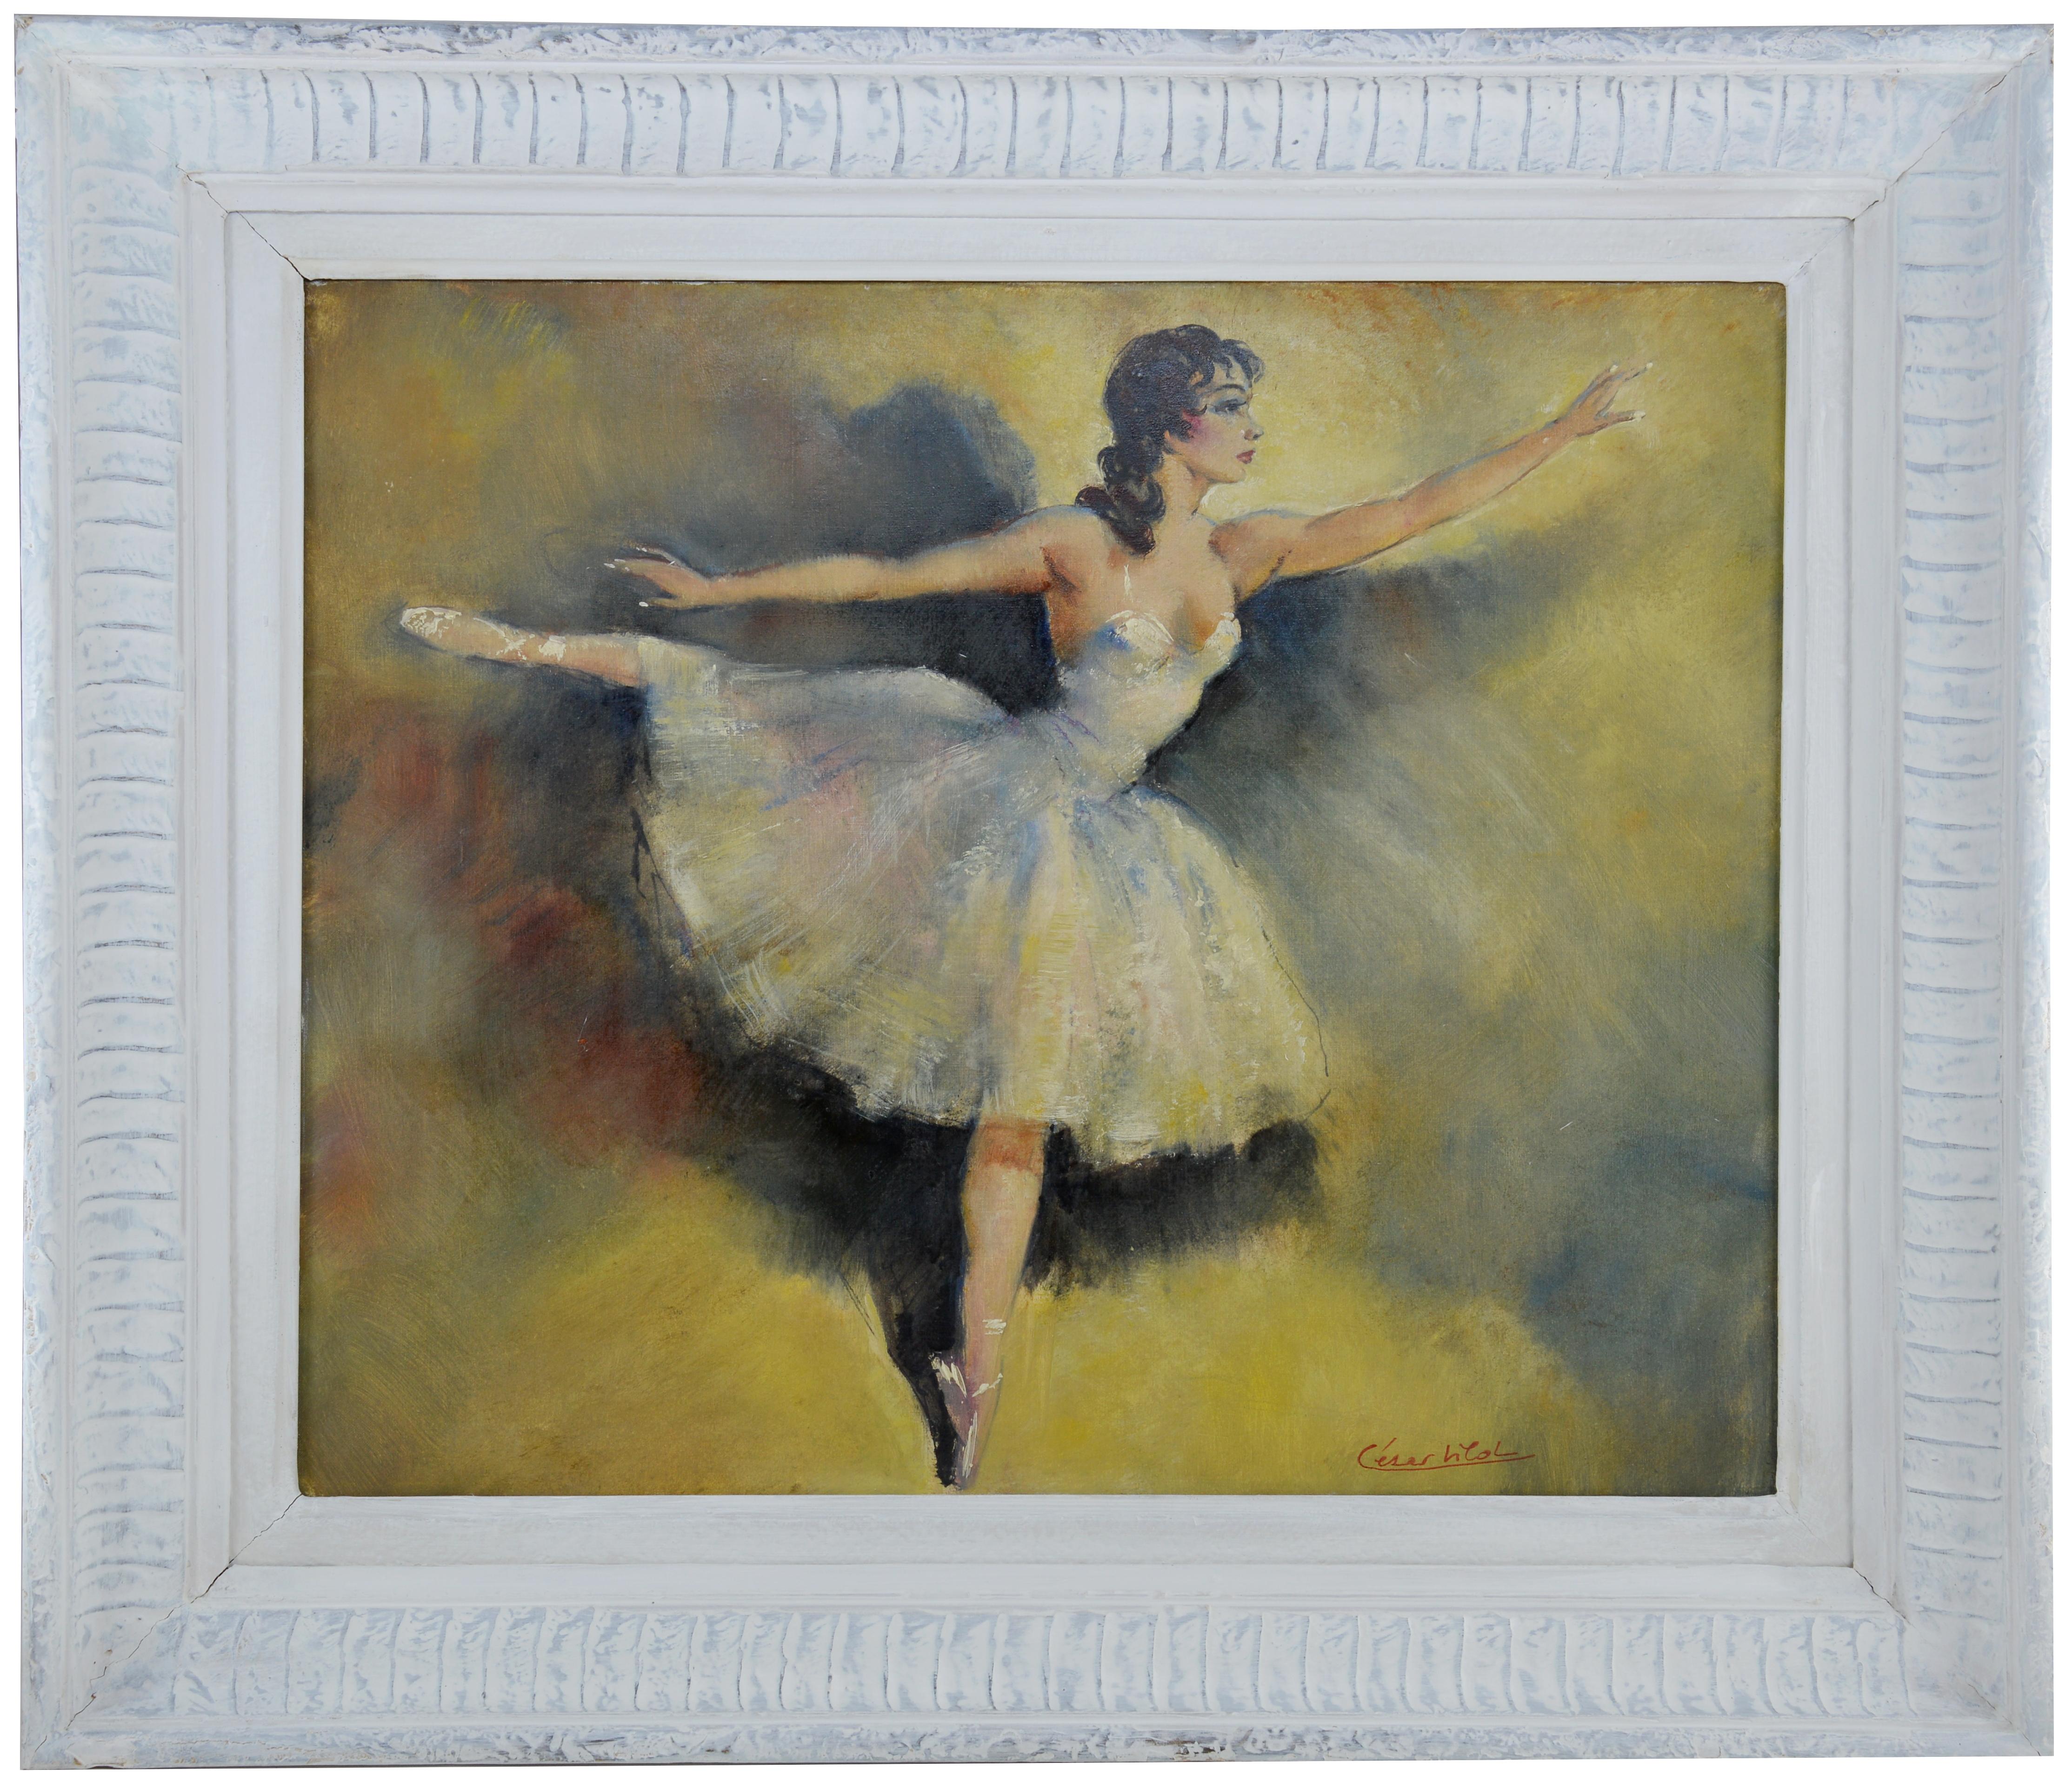 Oil on canvas by César Vilol, ca.1925. Ballerina. Measurements : with frame: 70.7x61.5 cm - 27.8x24.2 inches, without frame: 55x46 cm - 21.7x18.1 inches, format 10F. Signed "César Vilol" (see photo). In its Montparnasse frame.

Spanish painter from